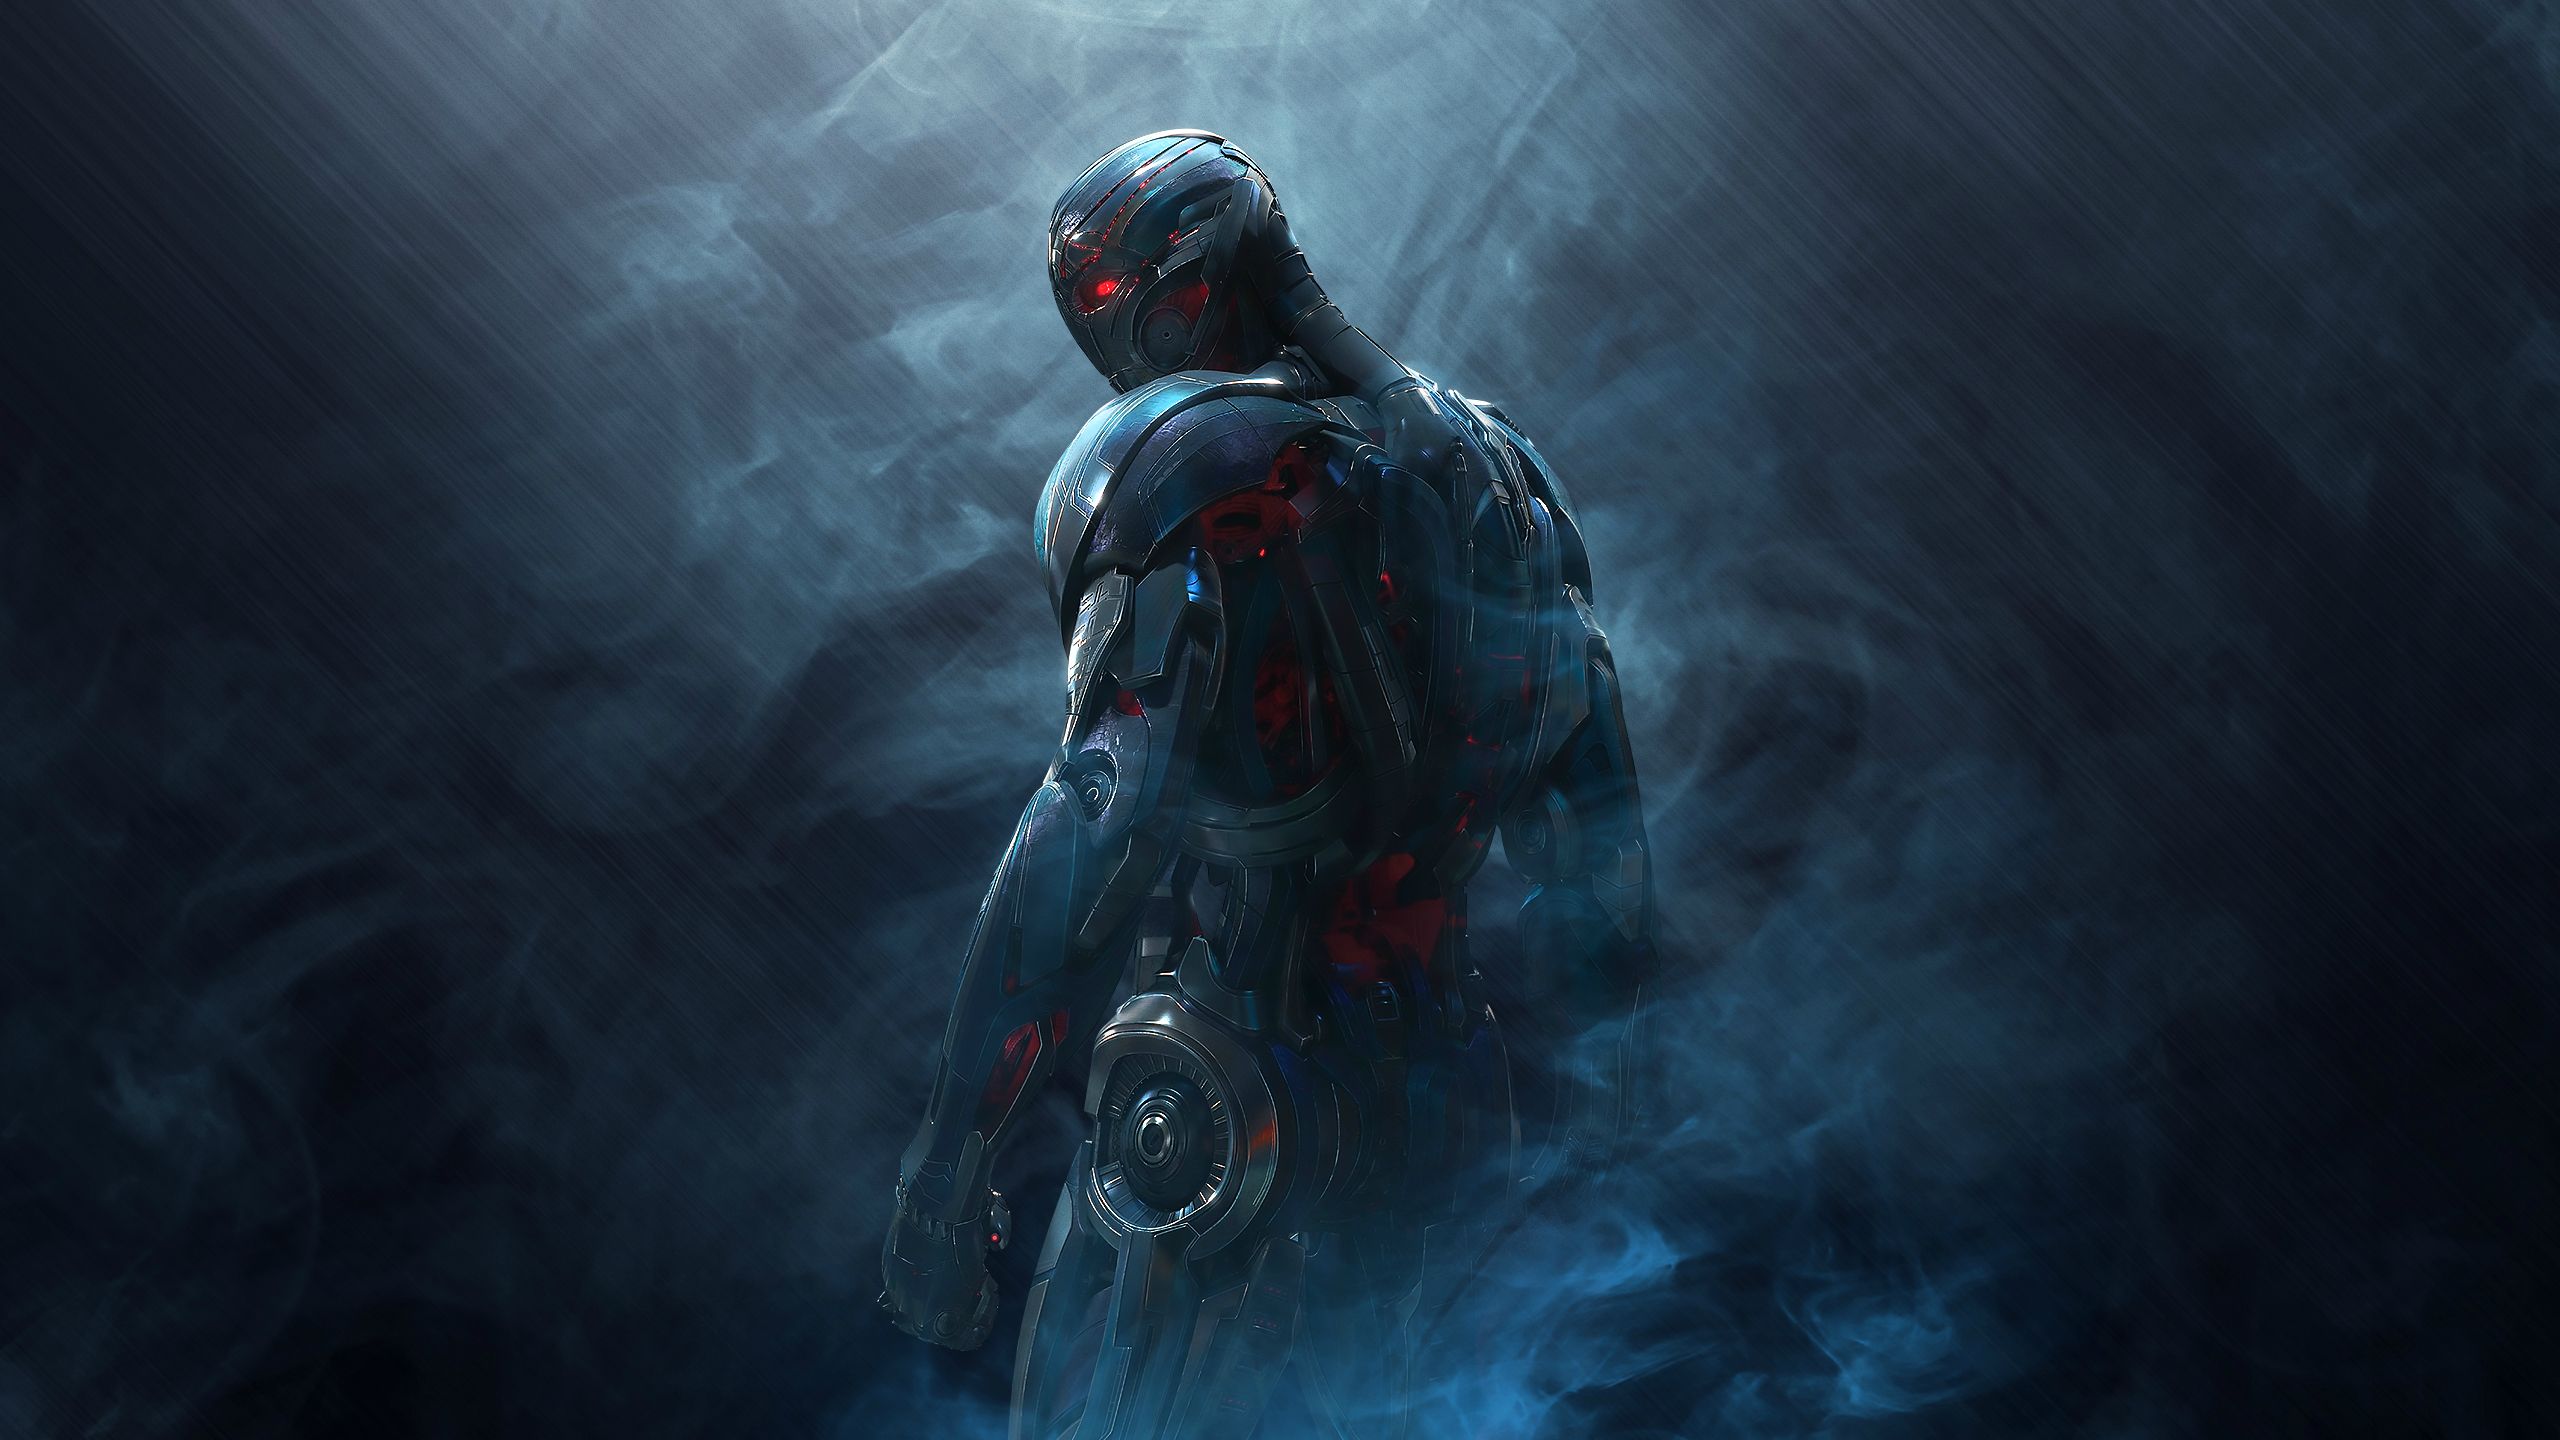 smoke, ultron, avengers: age of ultron, movie, robot, the avengers cell phone wallpapers